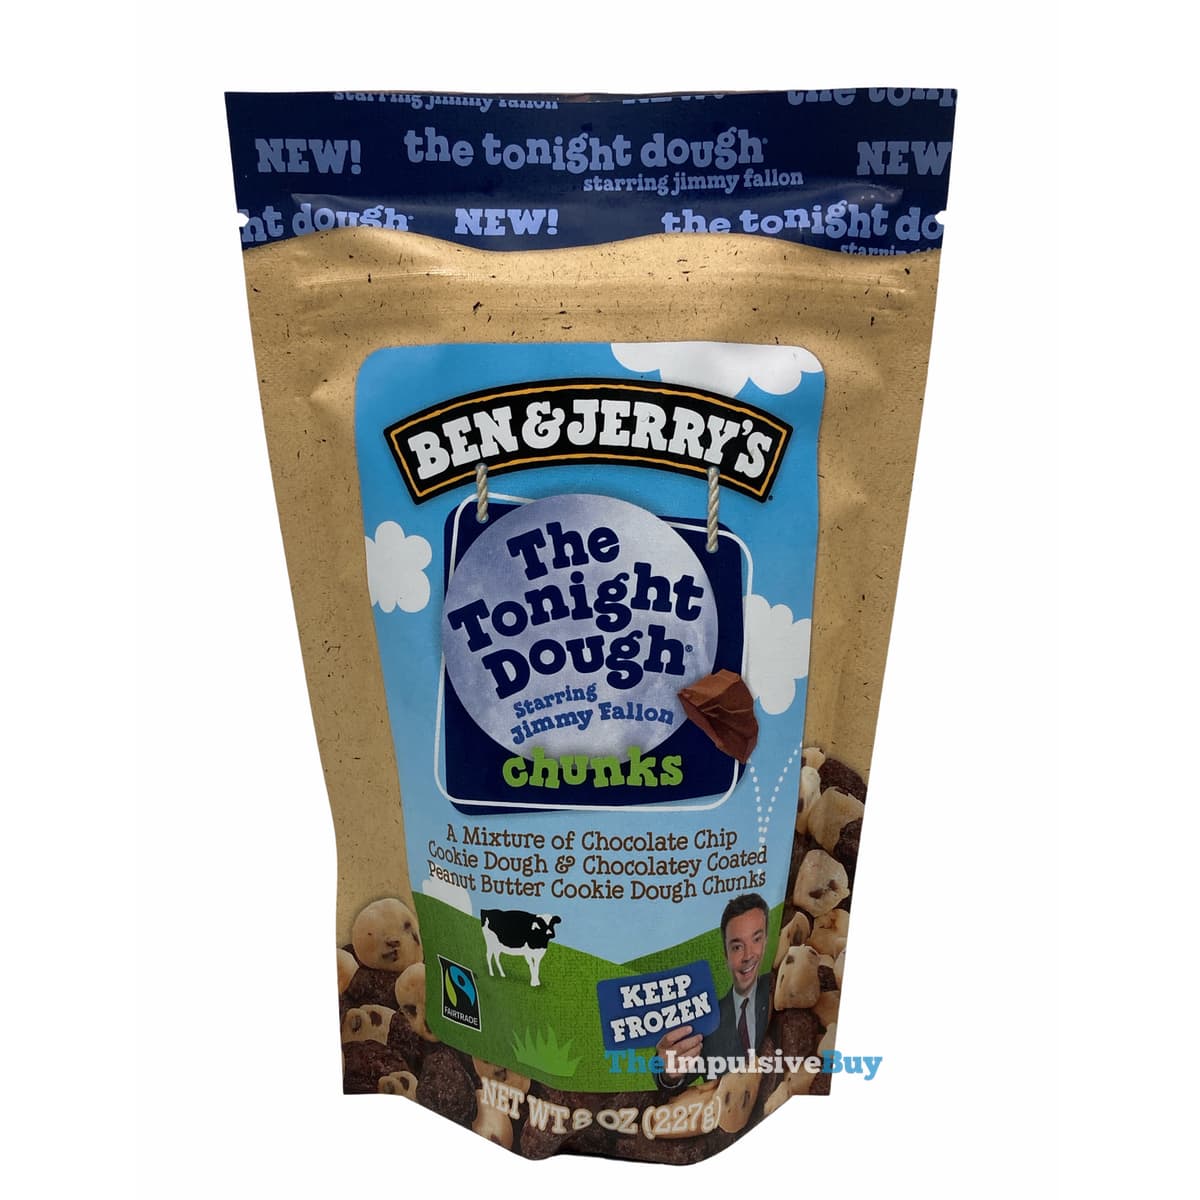 REVIEW Ben & Jerry's The Tonight Dough Chunks   The Impulsive Buy